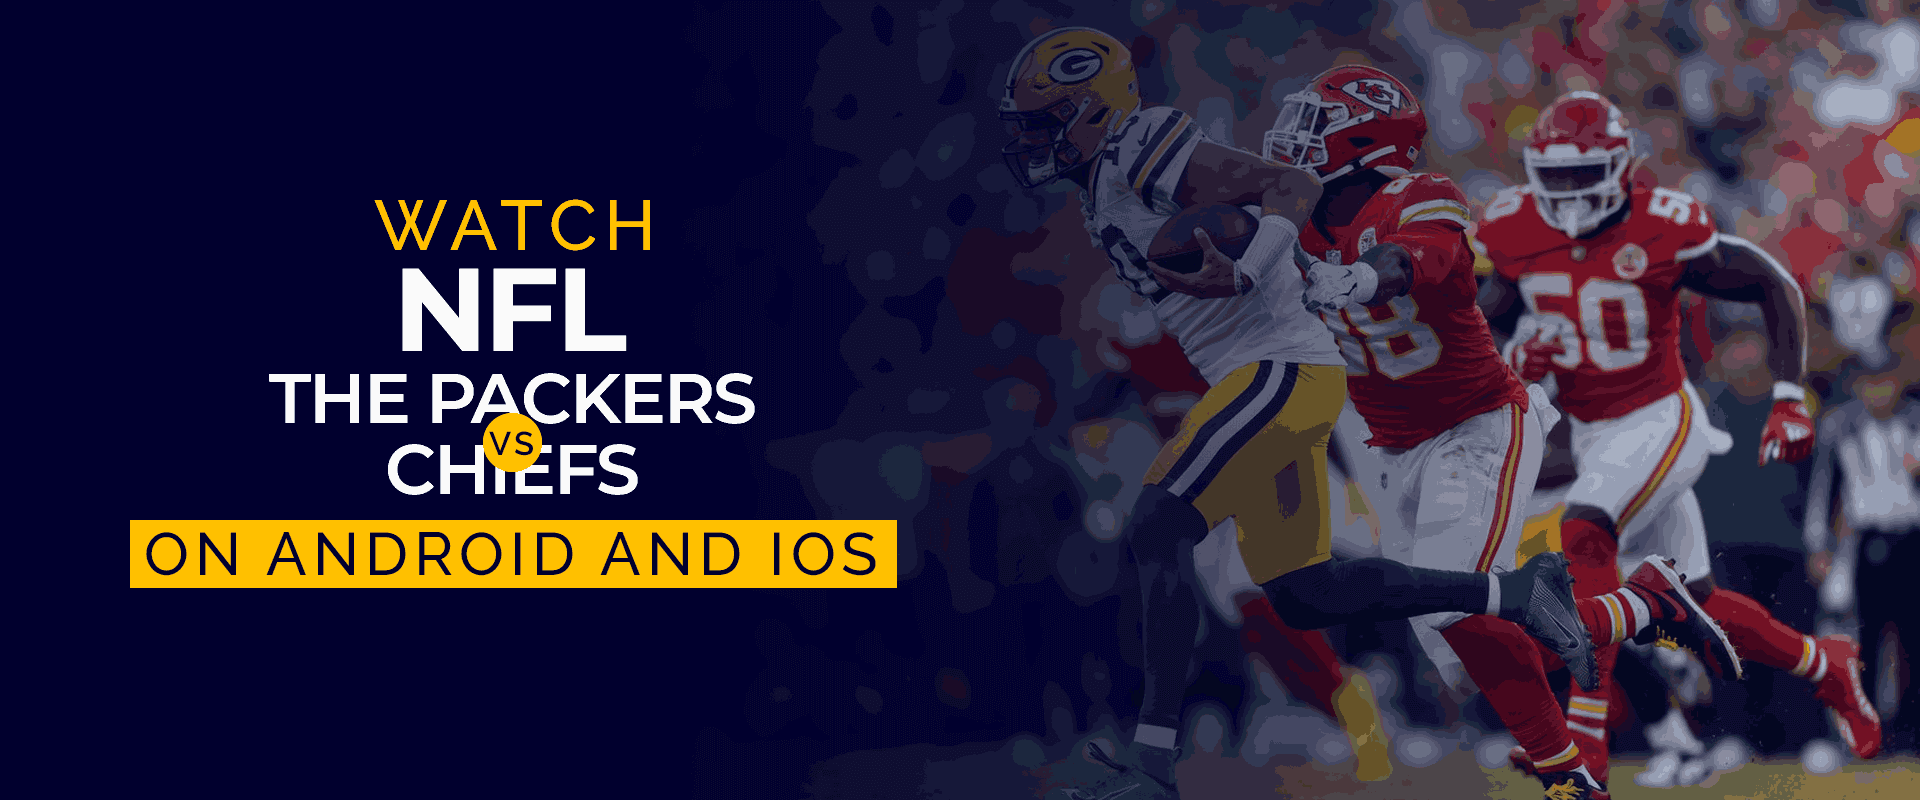 Assista NFL The Packers Vs Chiefs no Android e iOS